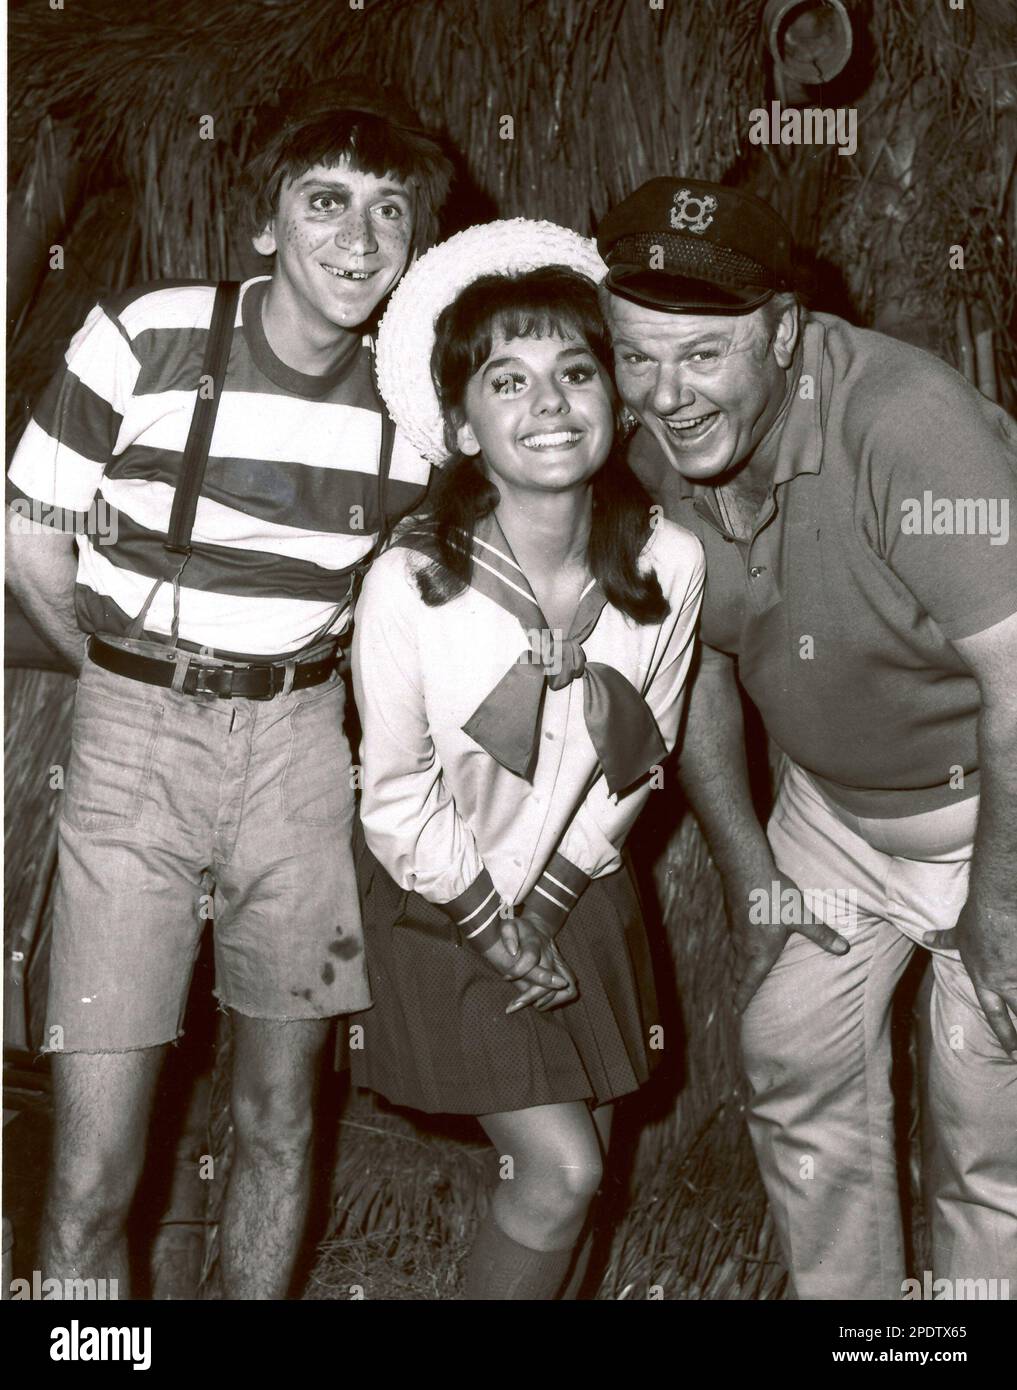 File Bob Denver Left Shown Posing With Fellow Cast Members Of Gilligan S Island Dawn